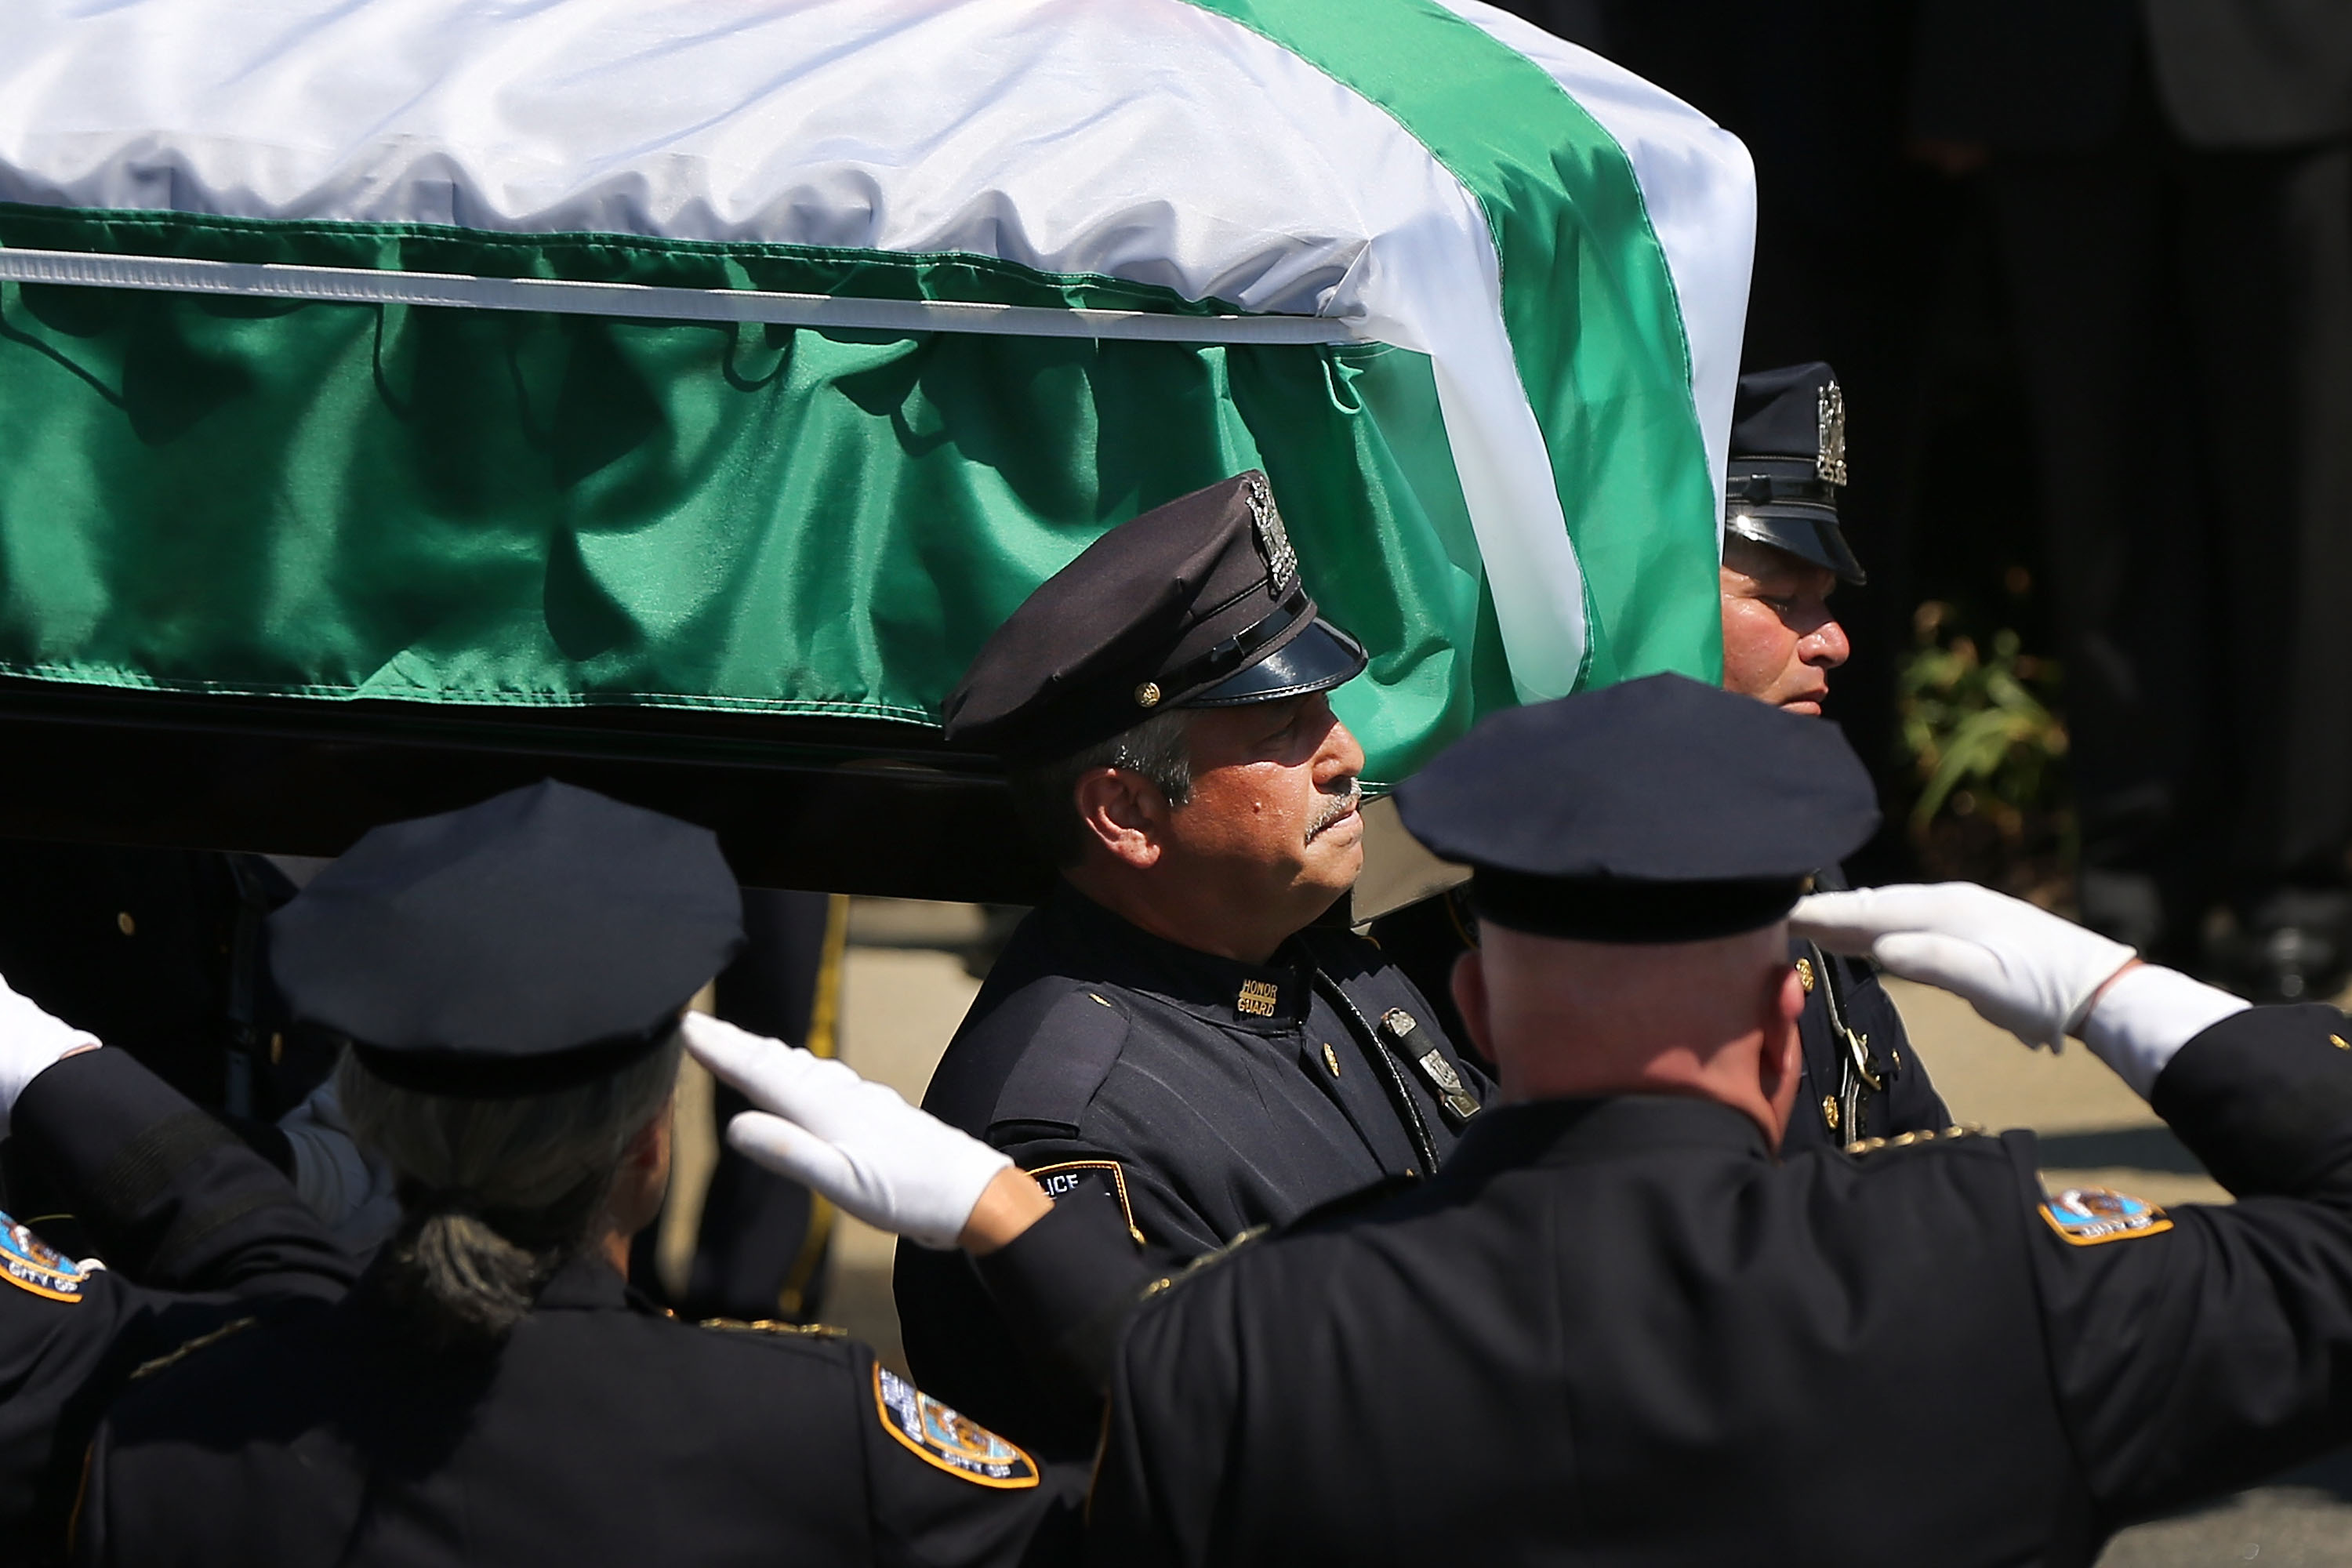 The casket for fallen New York City police officer Brian Moore is brought into a Long Island church on May 8, 2015 in Seaford, New York. (Photo by Spencer Platt/Getty Images)